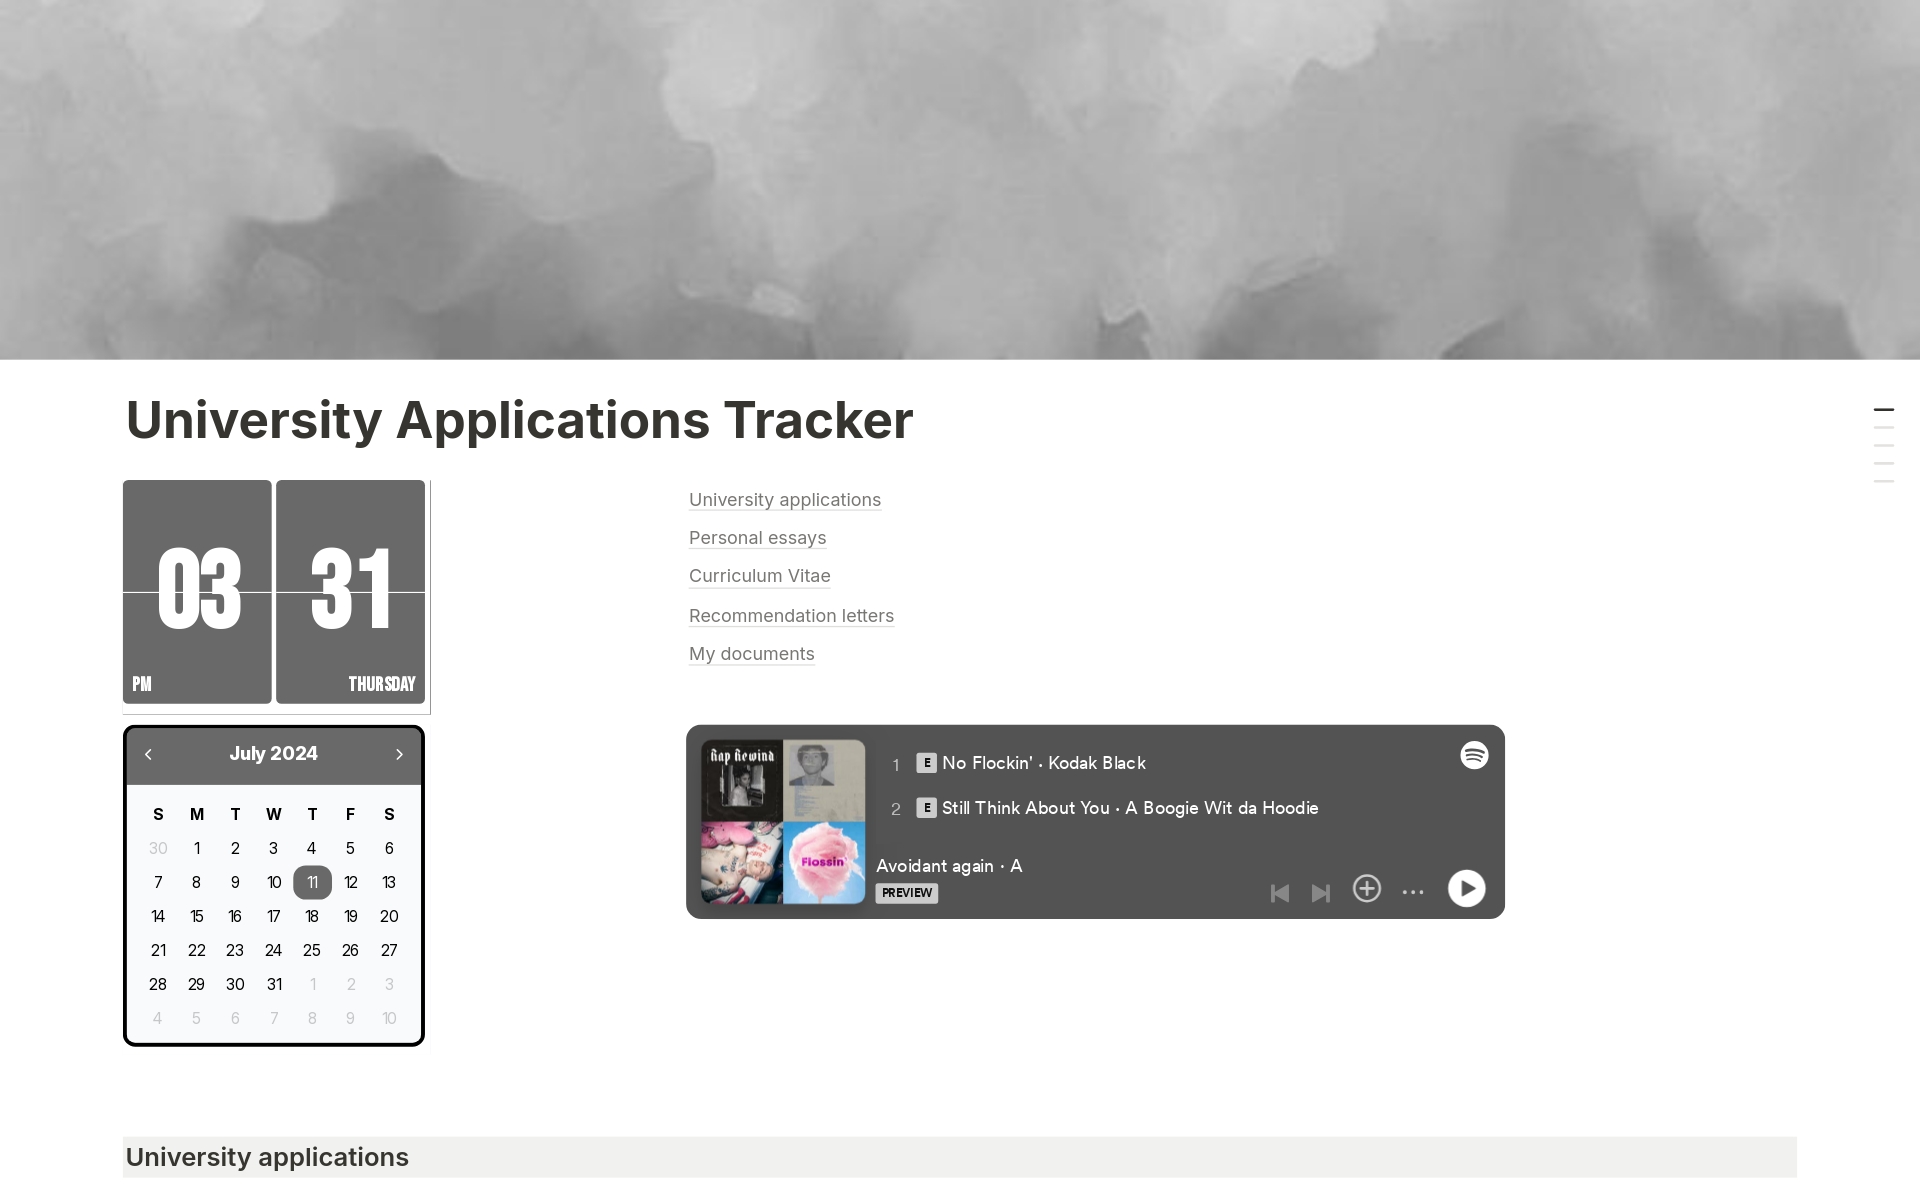 The University Applications Tracker for Notion is an all-in-one template designed to help your university application process. 

This comprehensive tool provides a structured workspace to manage applications, personal essays, CVs, recommendation letters, and essential documents.